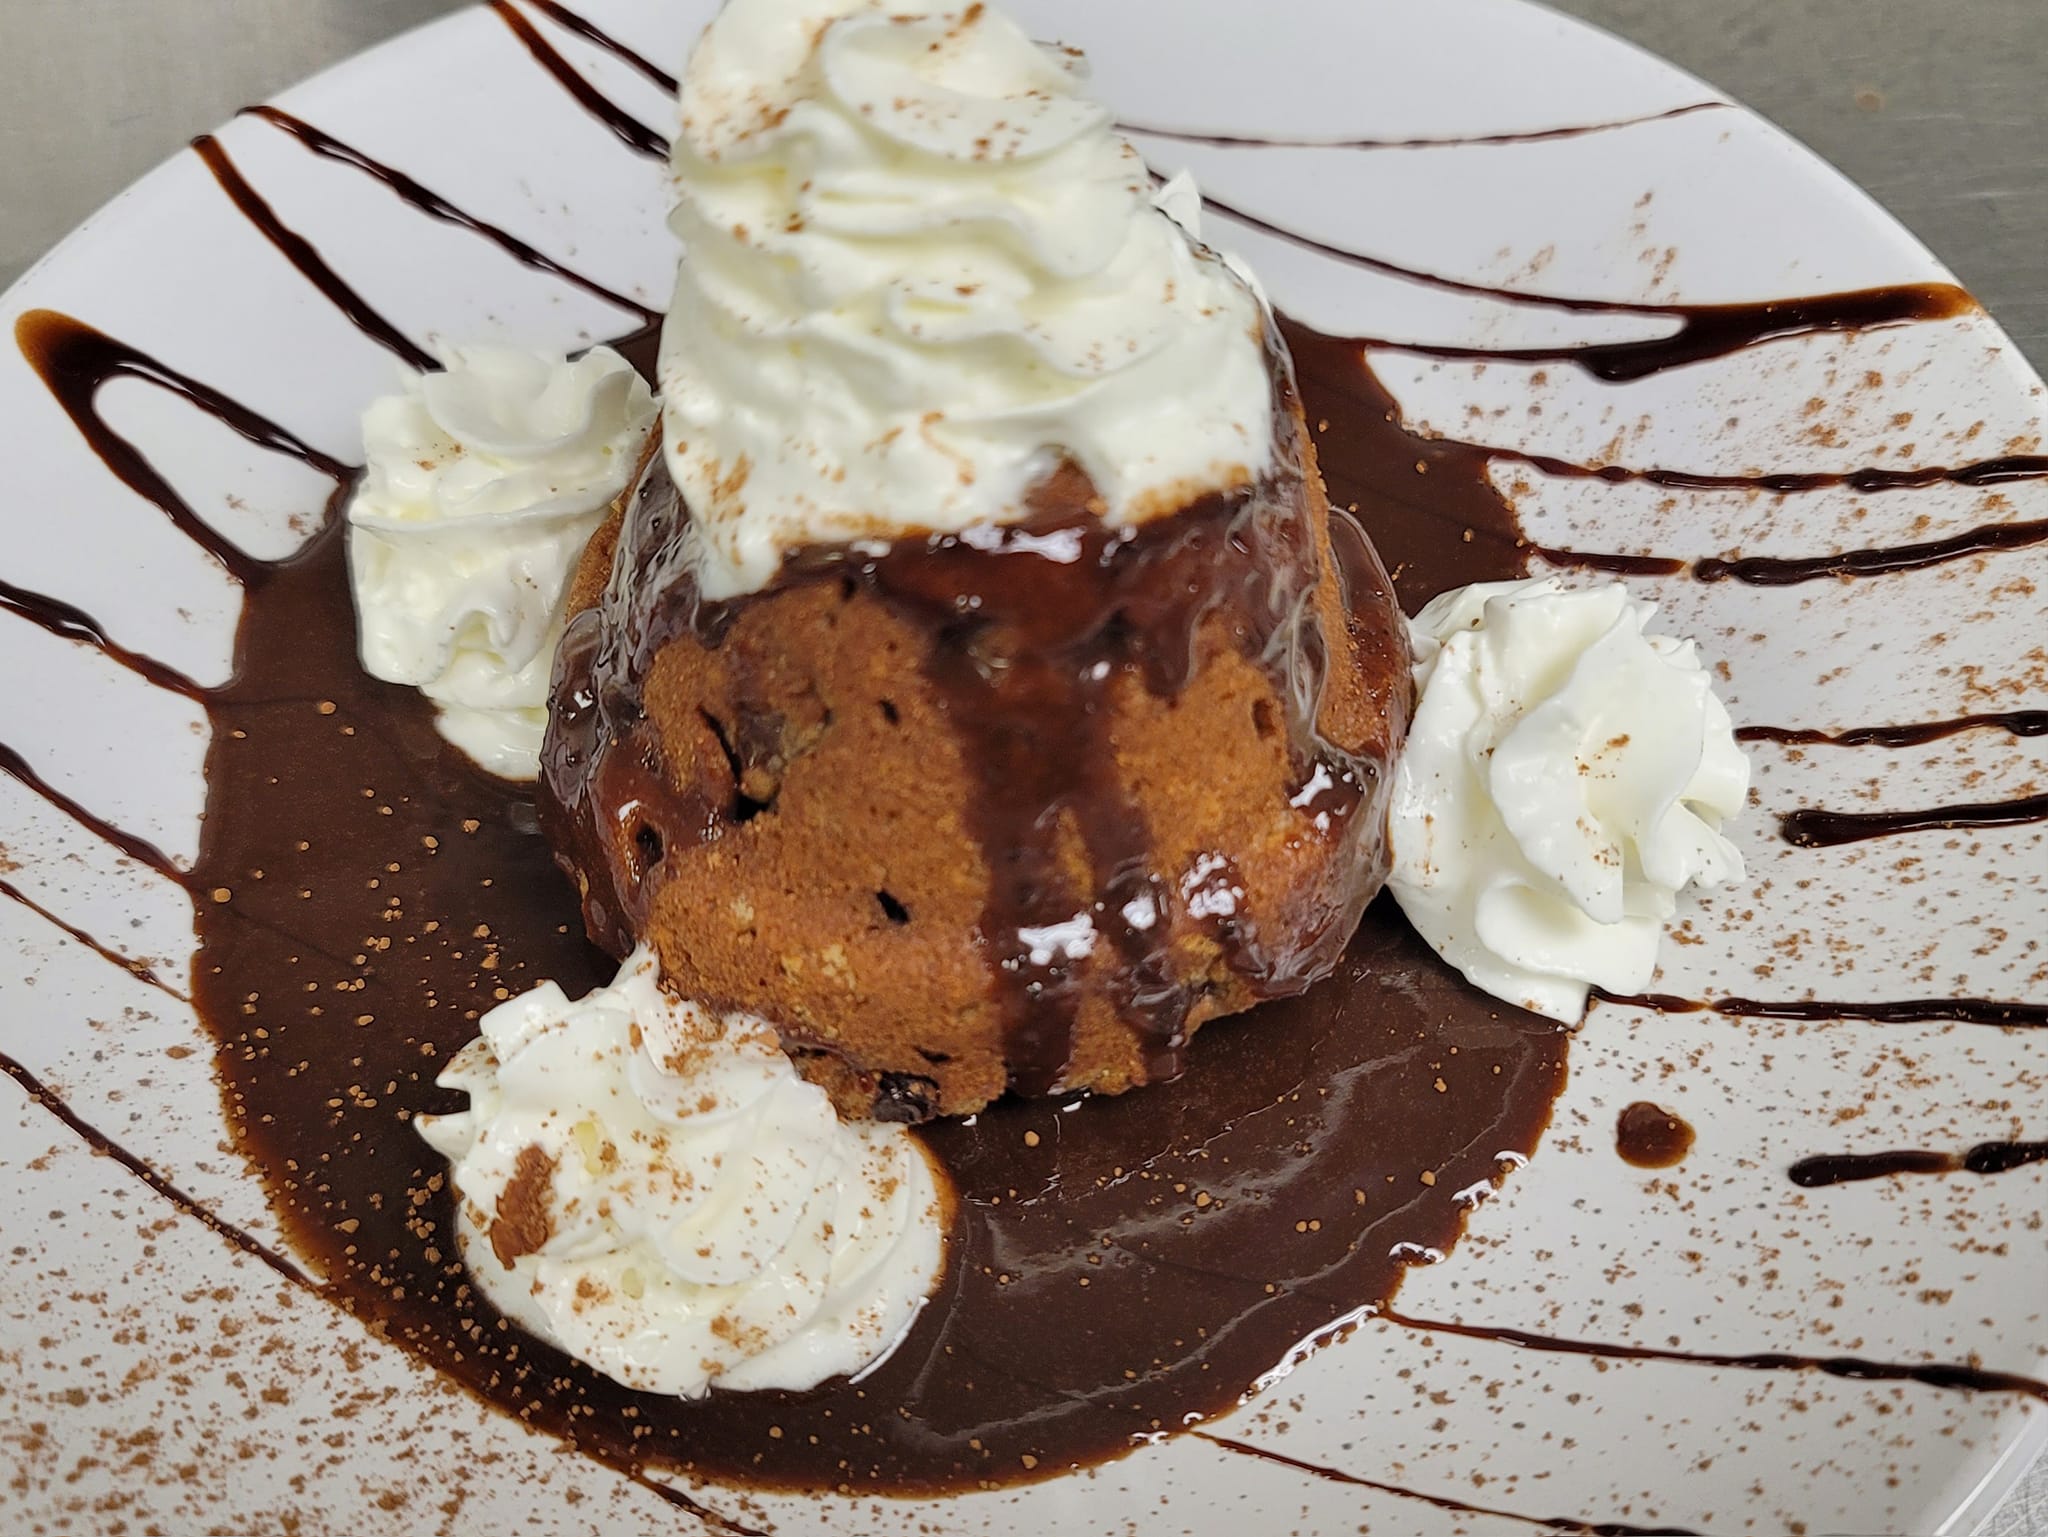 A chocolate lava cake with chocolate syrup and whipped cream